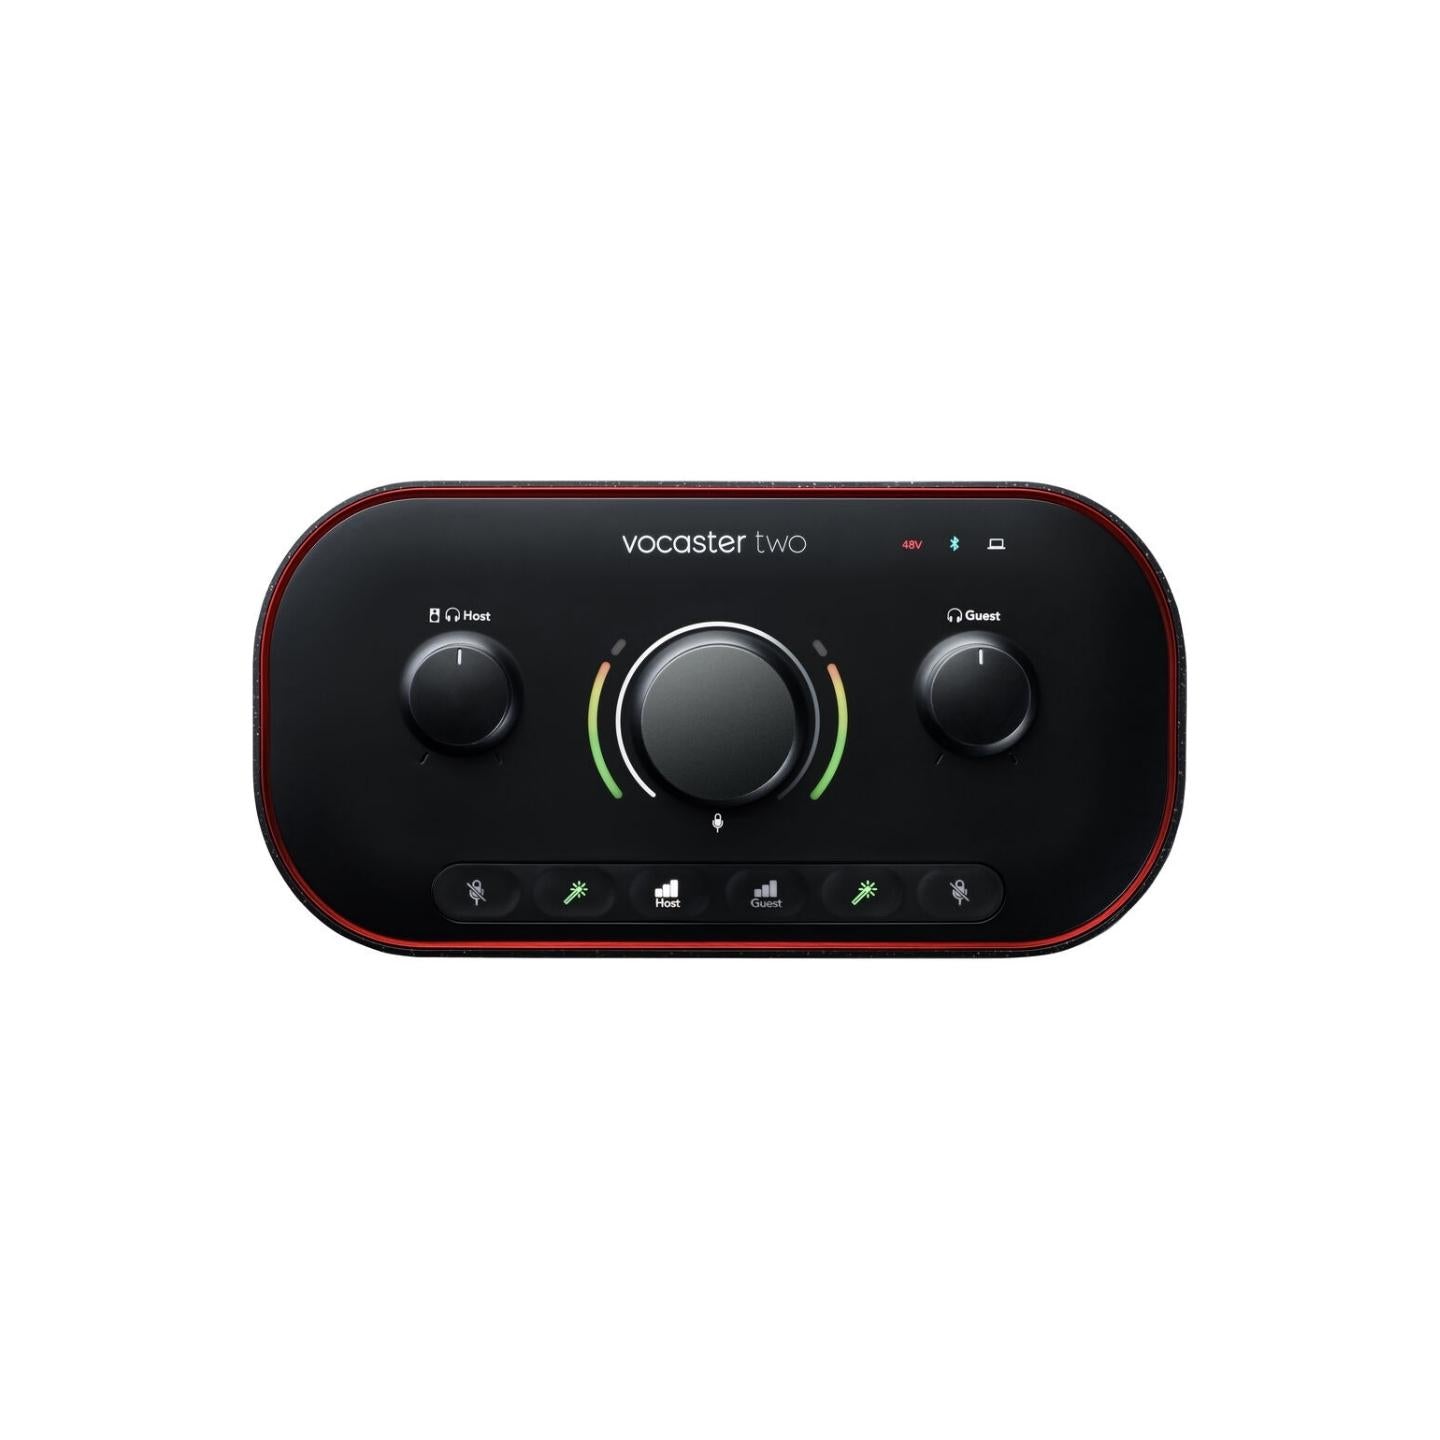 Focusrite Vocaster Two Podcast Audio Interface with Bluetooth, Auto-Gain, Two Mic Inputs & Headphones Output, Voice Presets, Mute Button for Host and Guest (Two Studio Available)